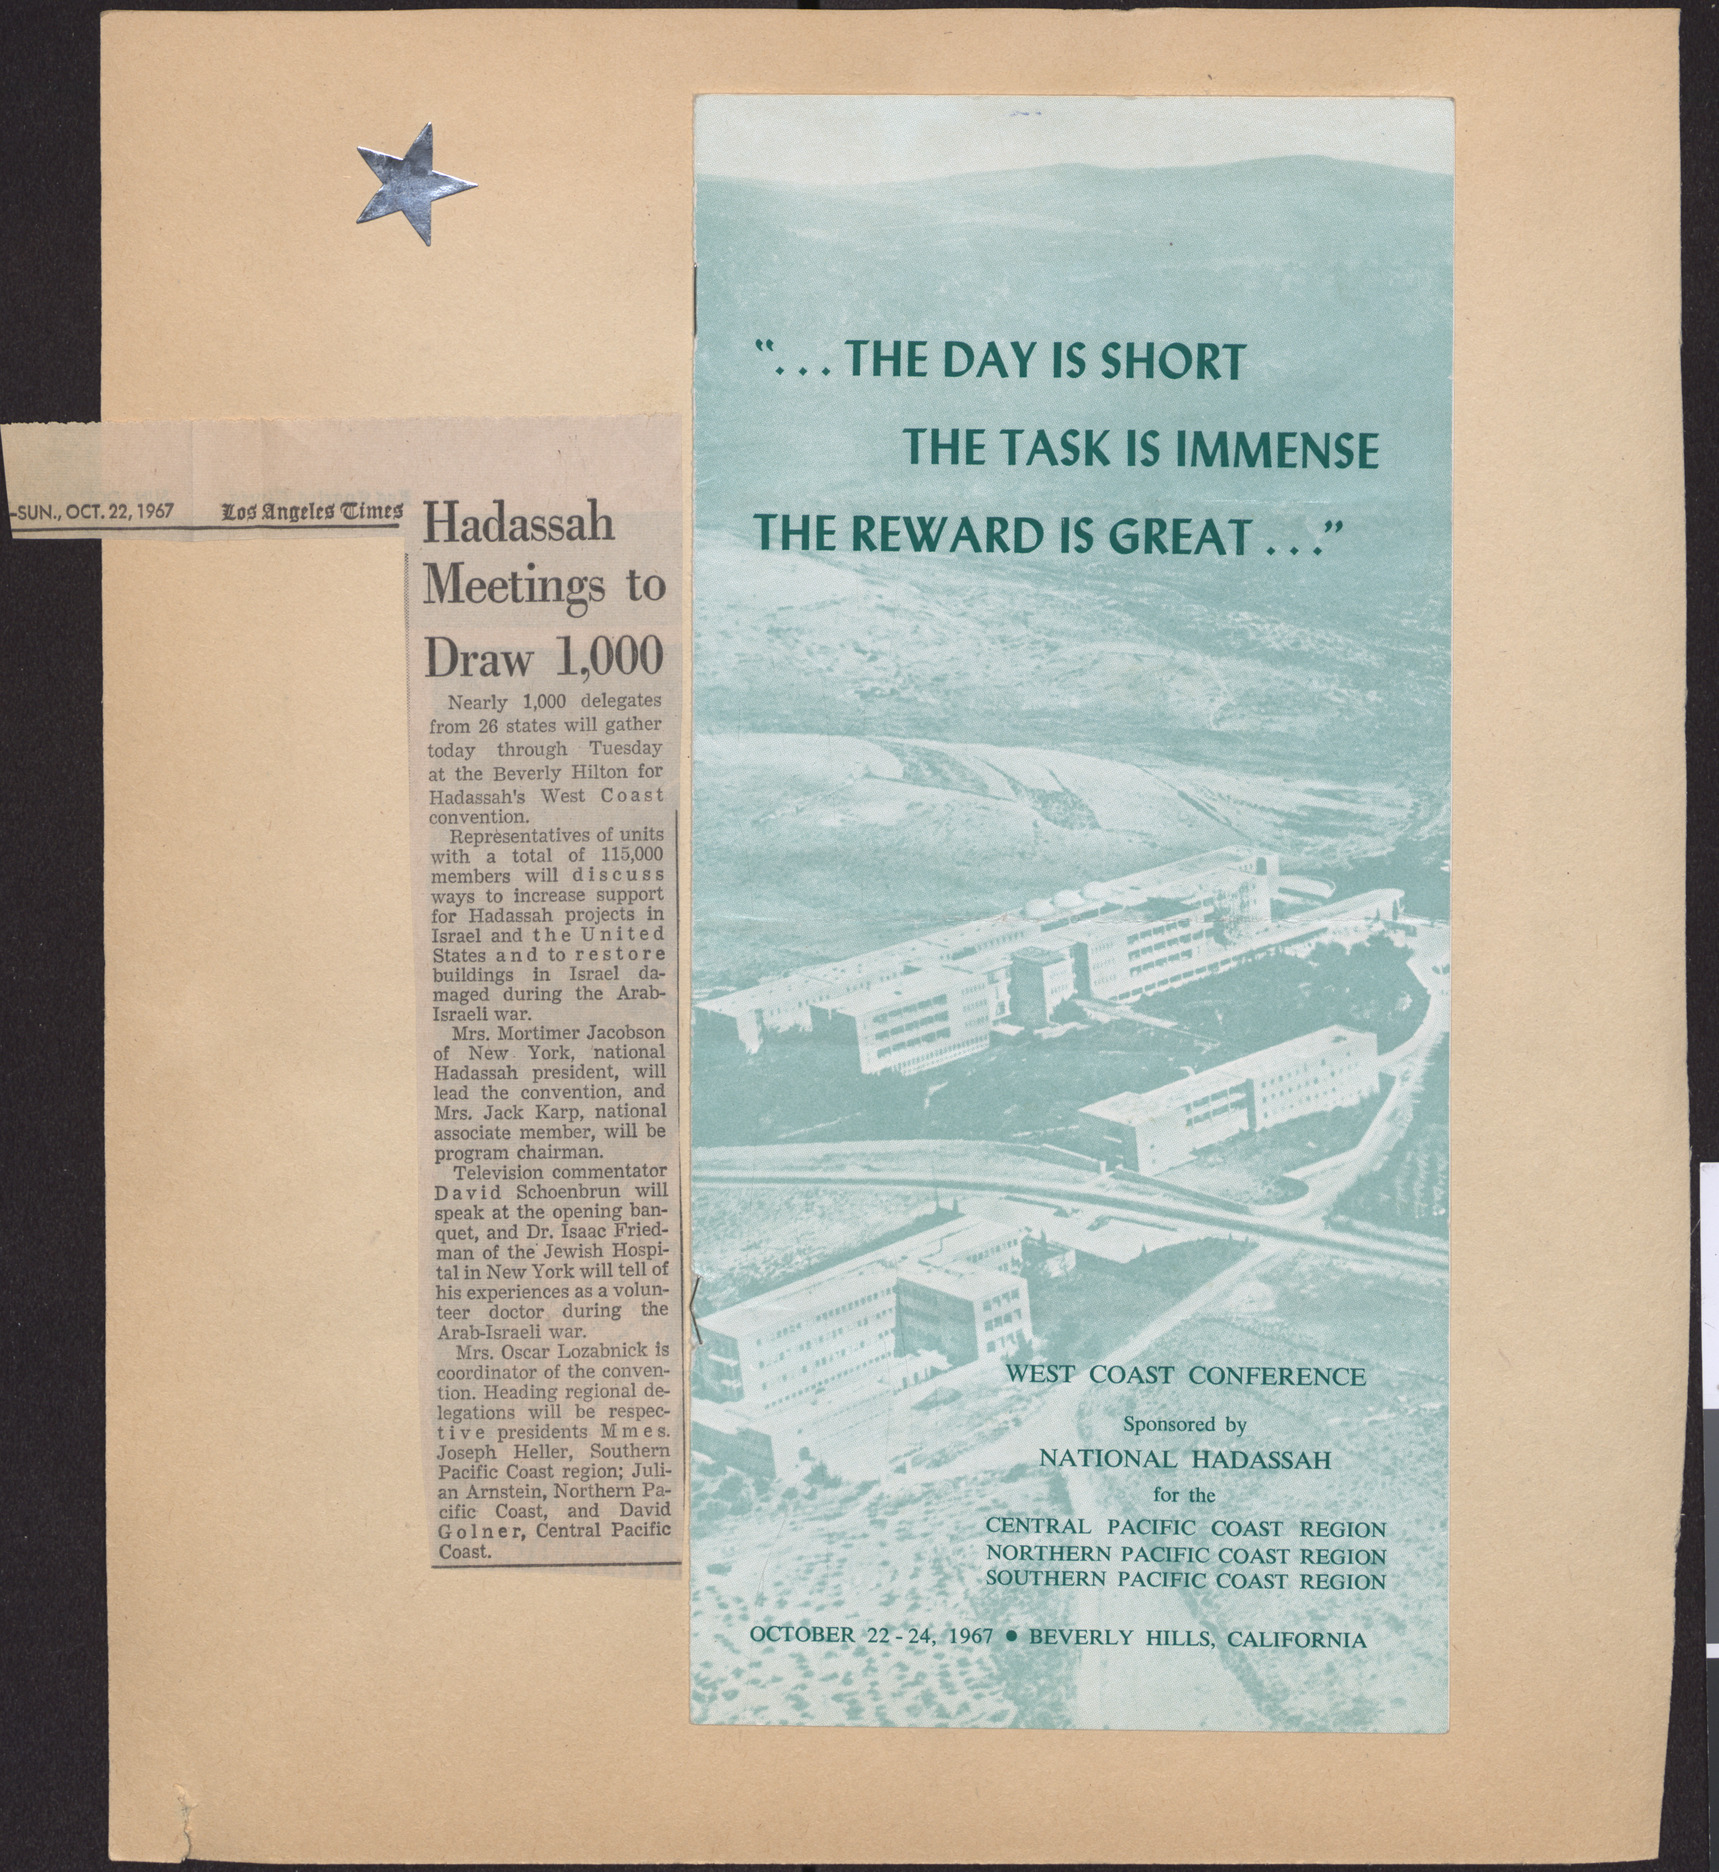 Newspaper clipping, Hadassah meetings to draw 1,000, Los Angeles Times, October 22, 1967, and Cover of conference program for the Hadassah West Coast Conference, October 22-24, 1967